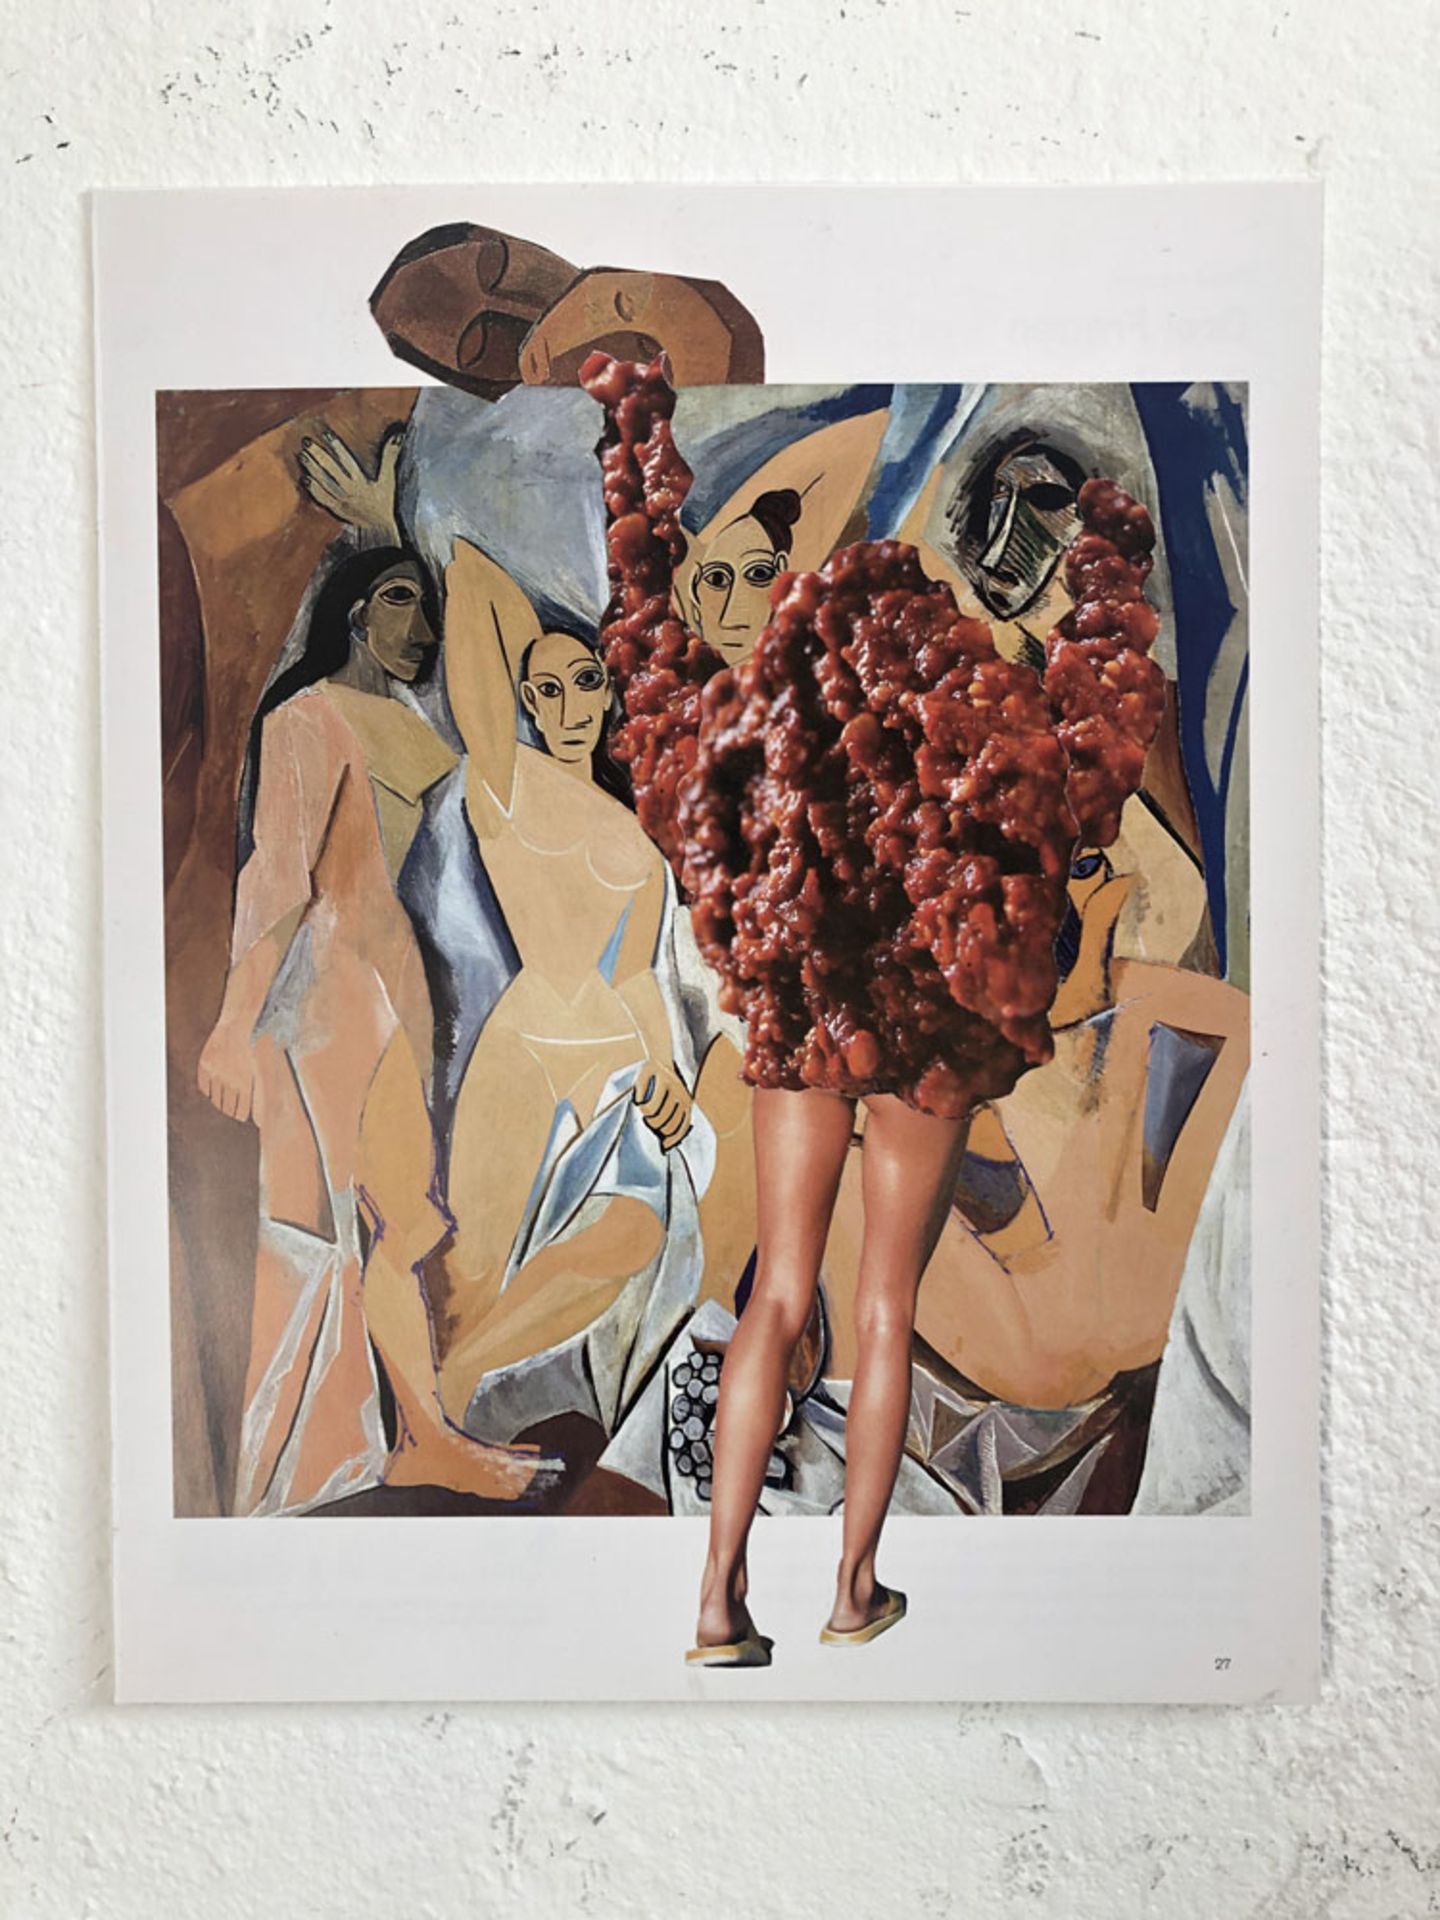 244 - - Manfred Peckl. Meat Picasso. 2014. Collage. 32 x 25 cm.